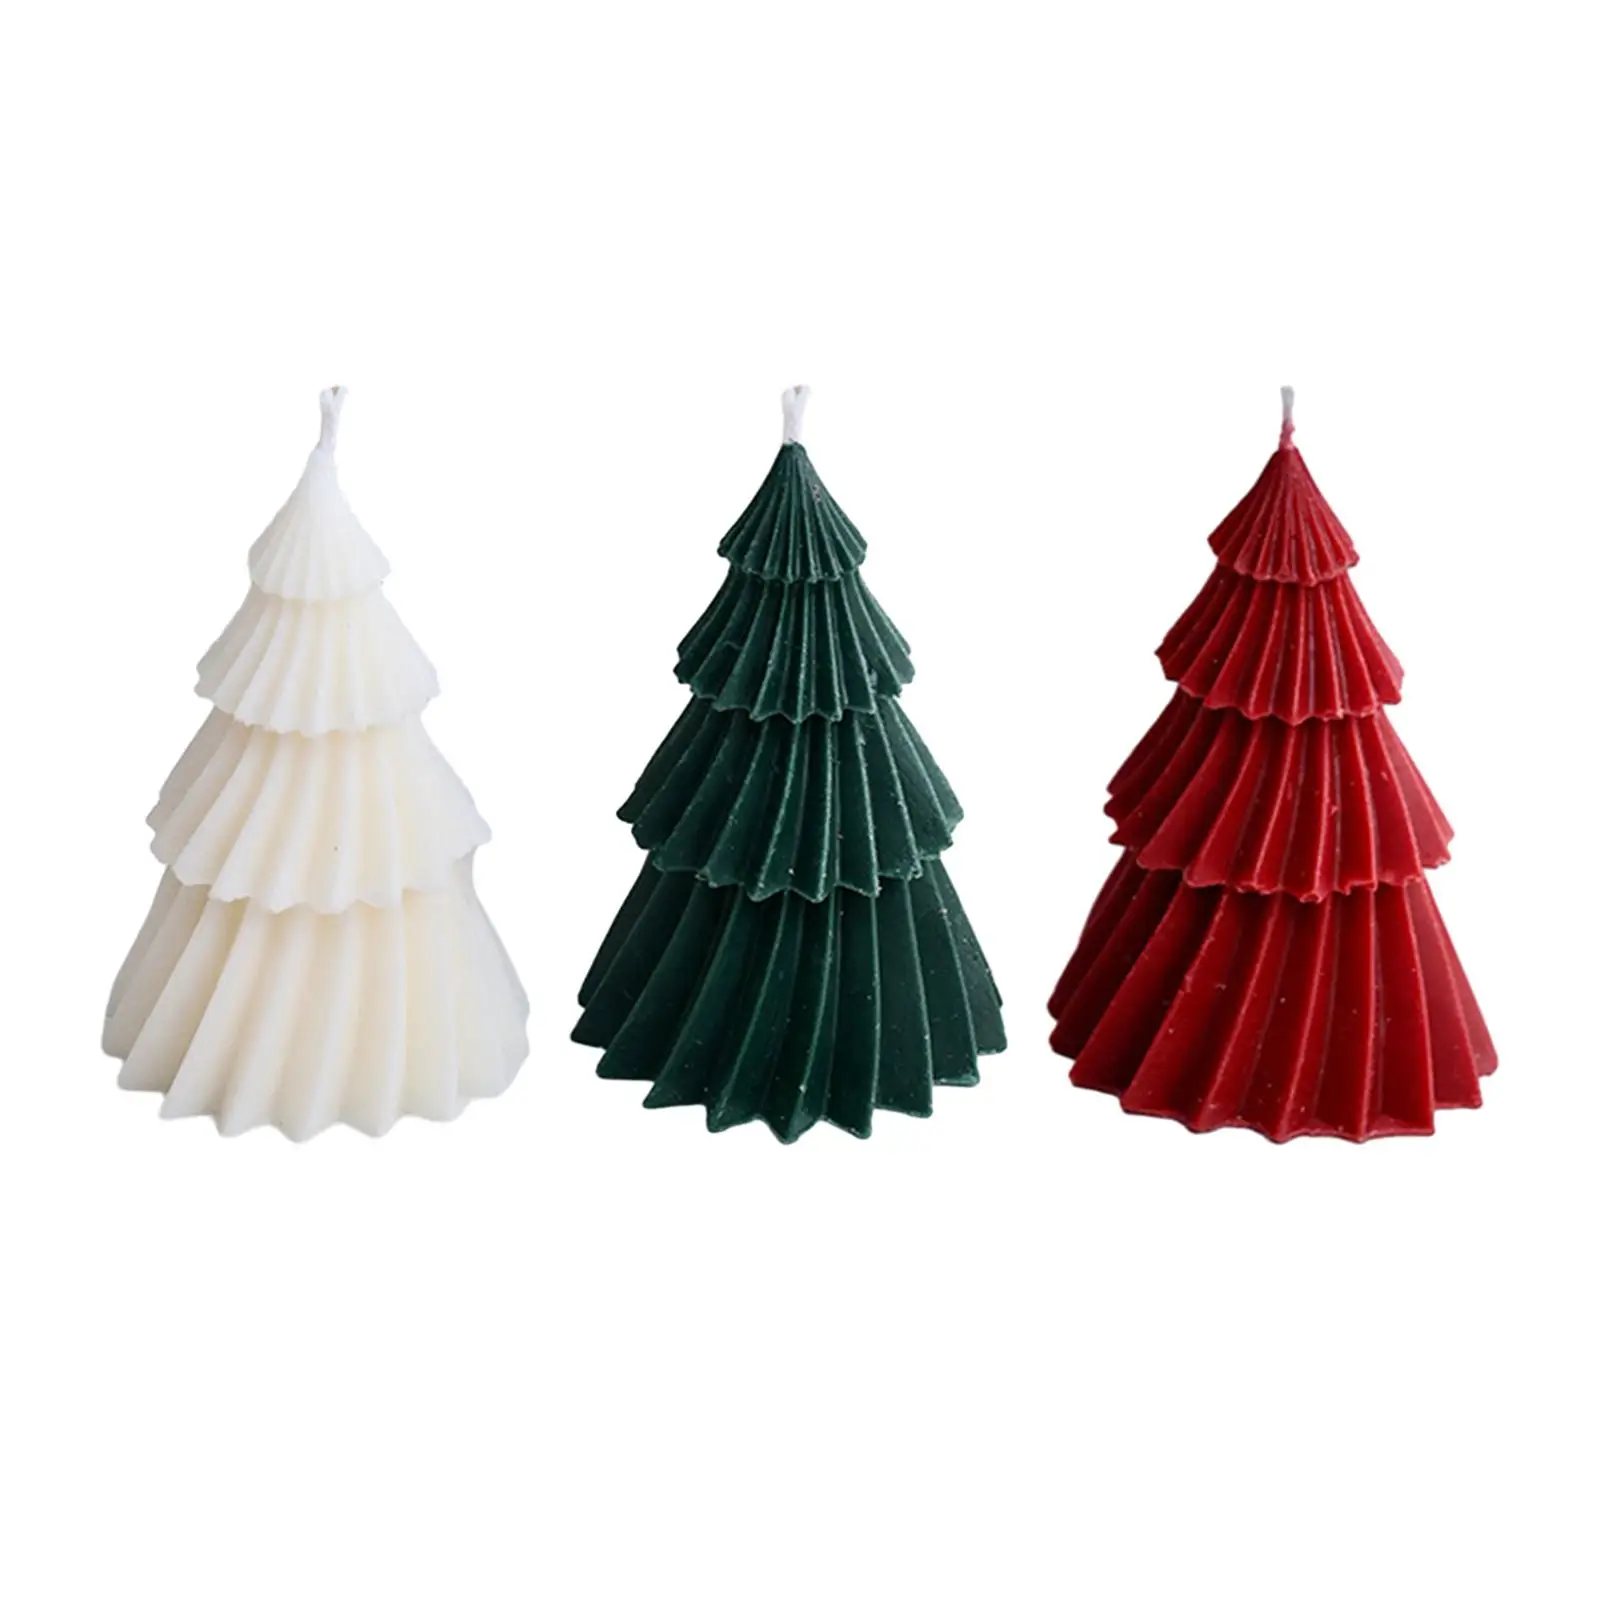 Christmas Tree Scented Candles Rotating Shape Scented Candle Christmas Decoration Gift Holiday Gift Box for Home Ornment